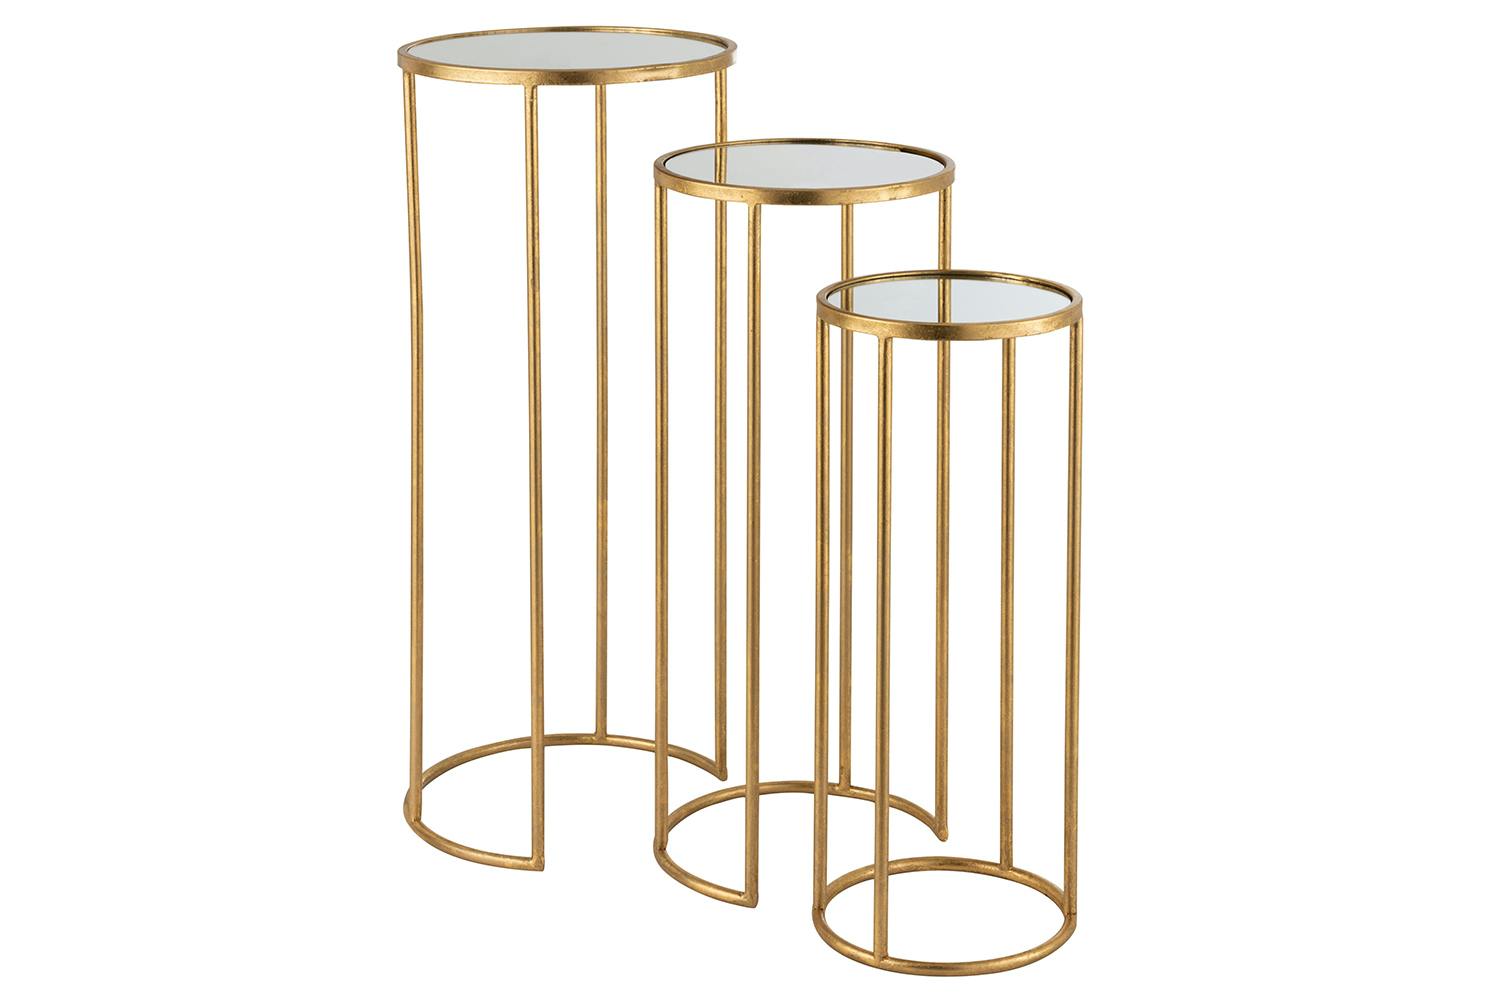 Mirrored Side Tables | Gold | Set of 3